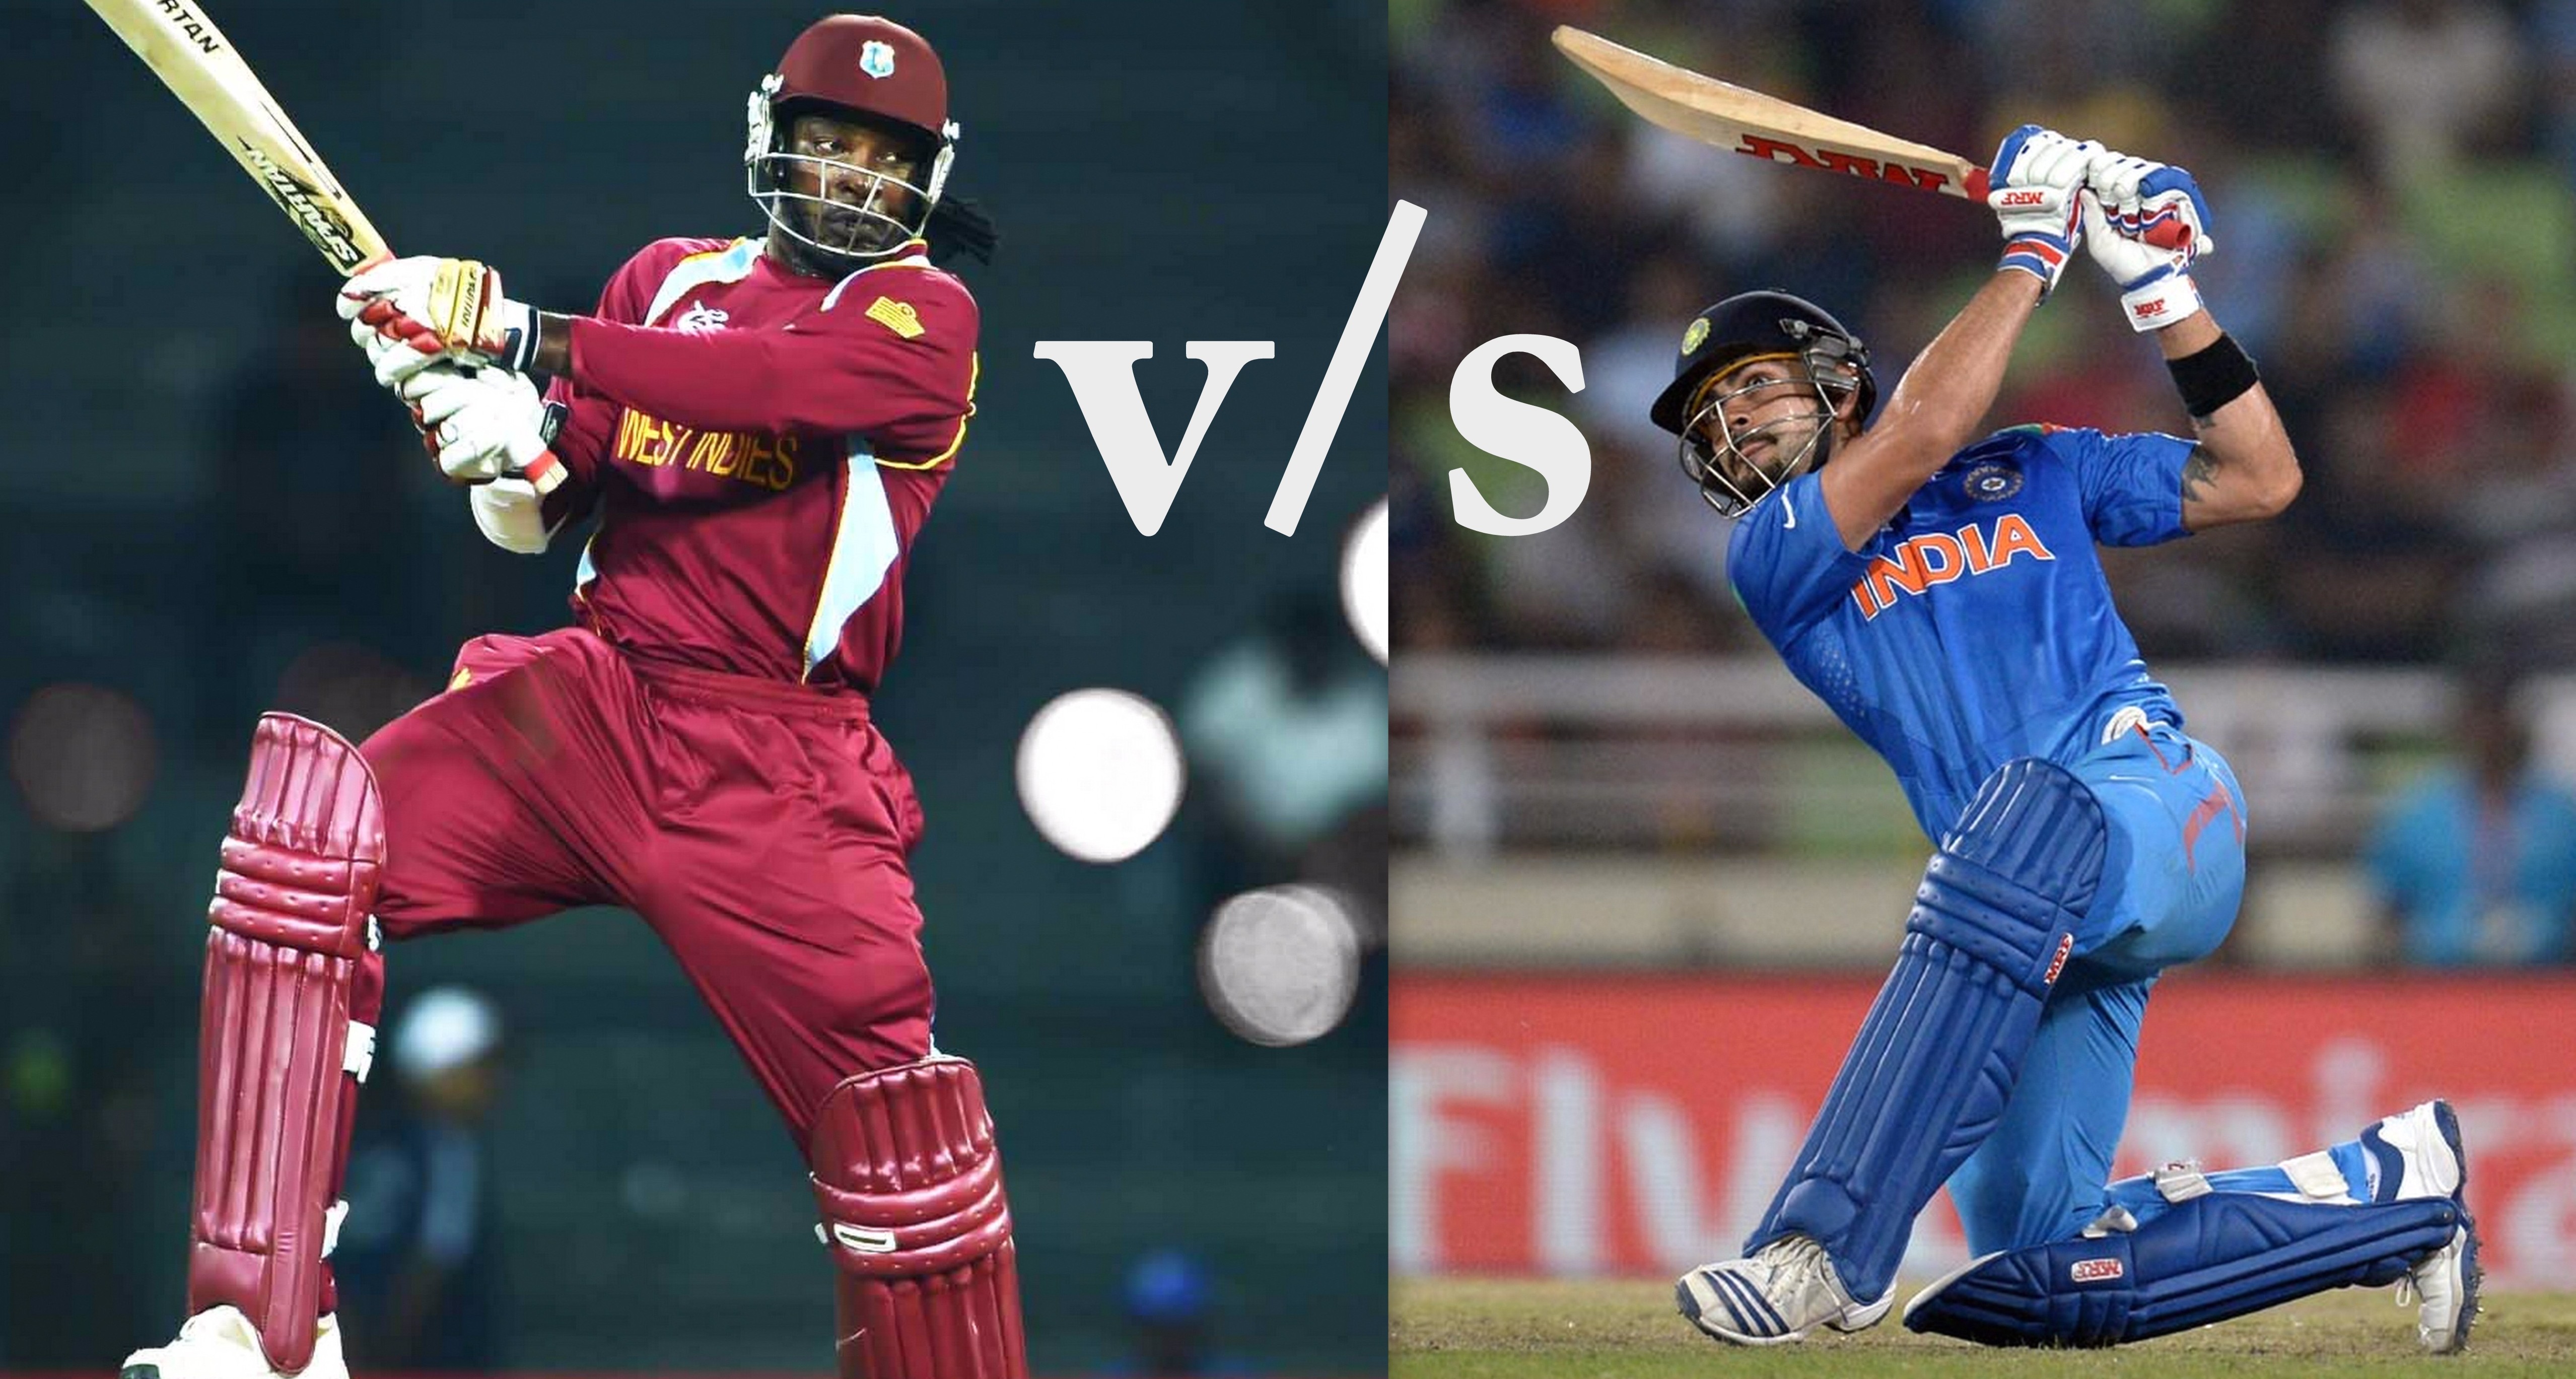 India vs West Indies Cricket Match